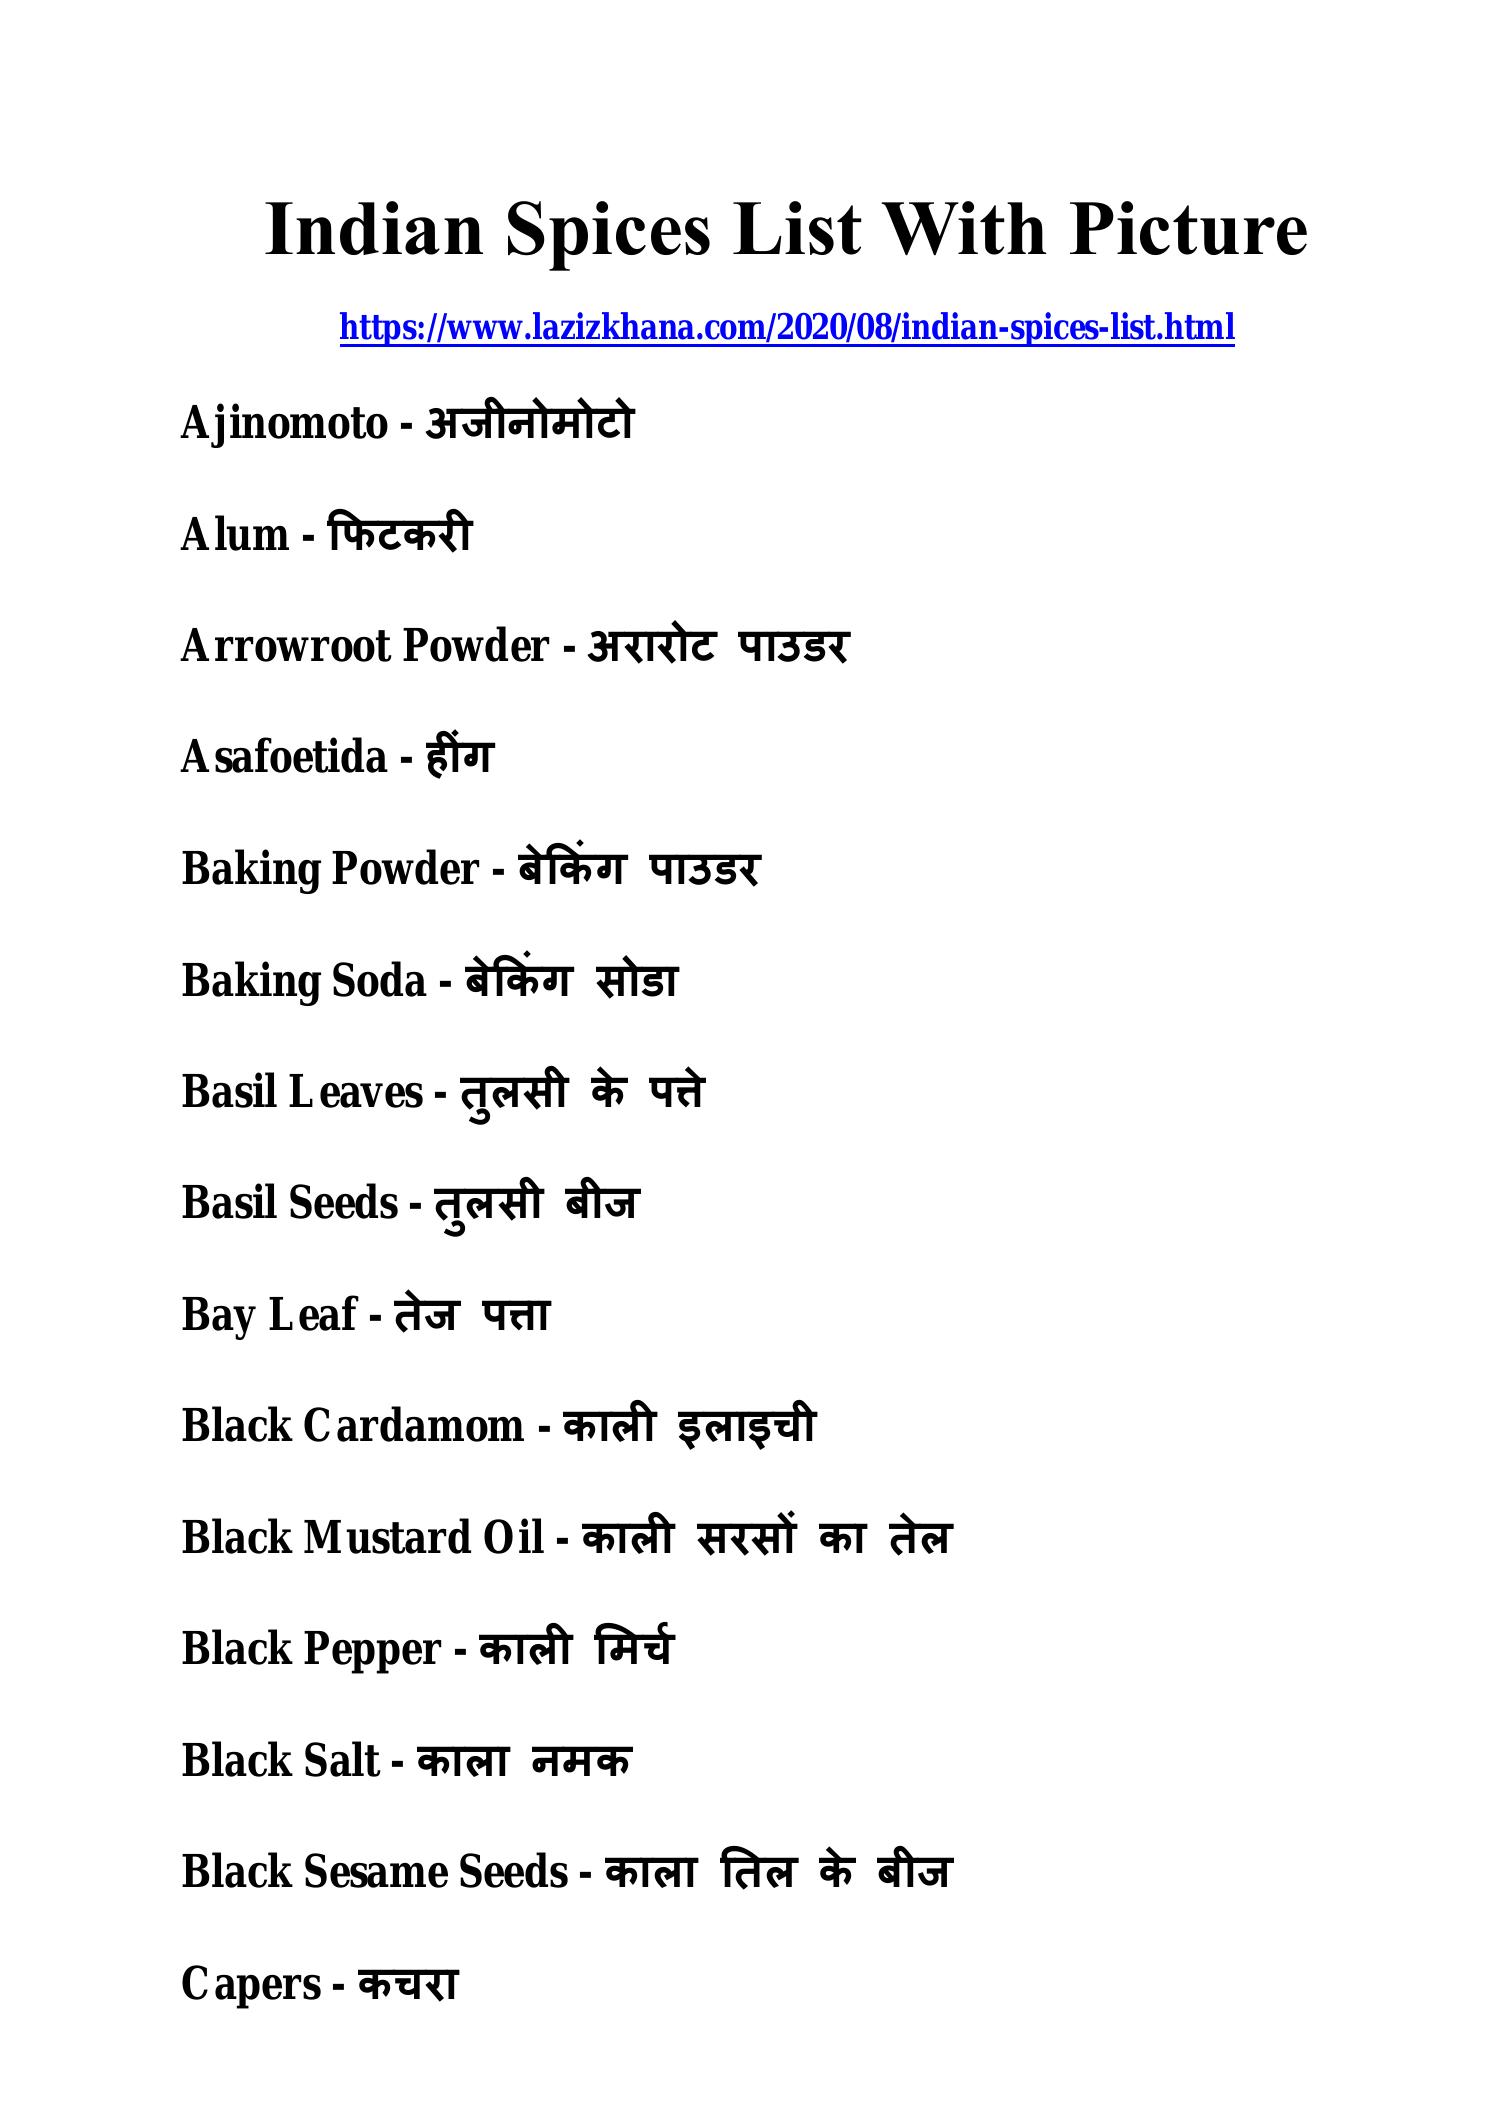 List of Top 90+ Spices and Herbs with Their Meanings in Hindi